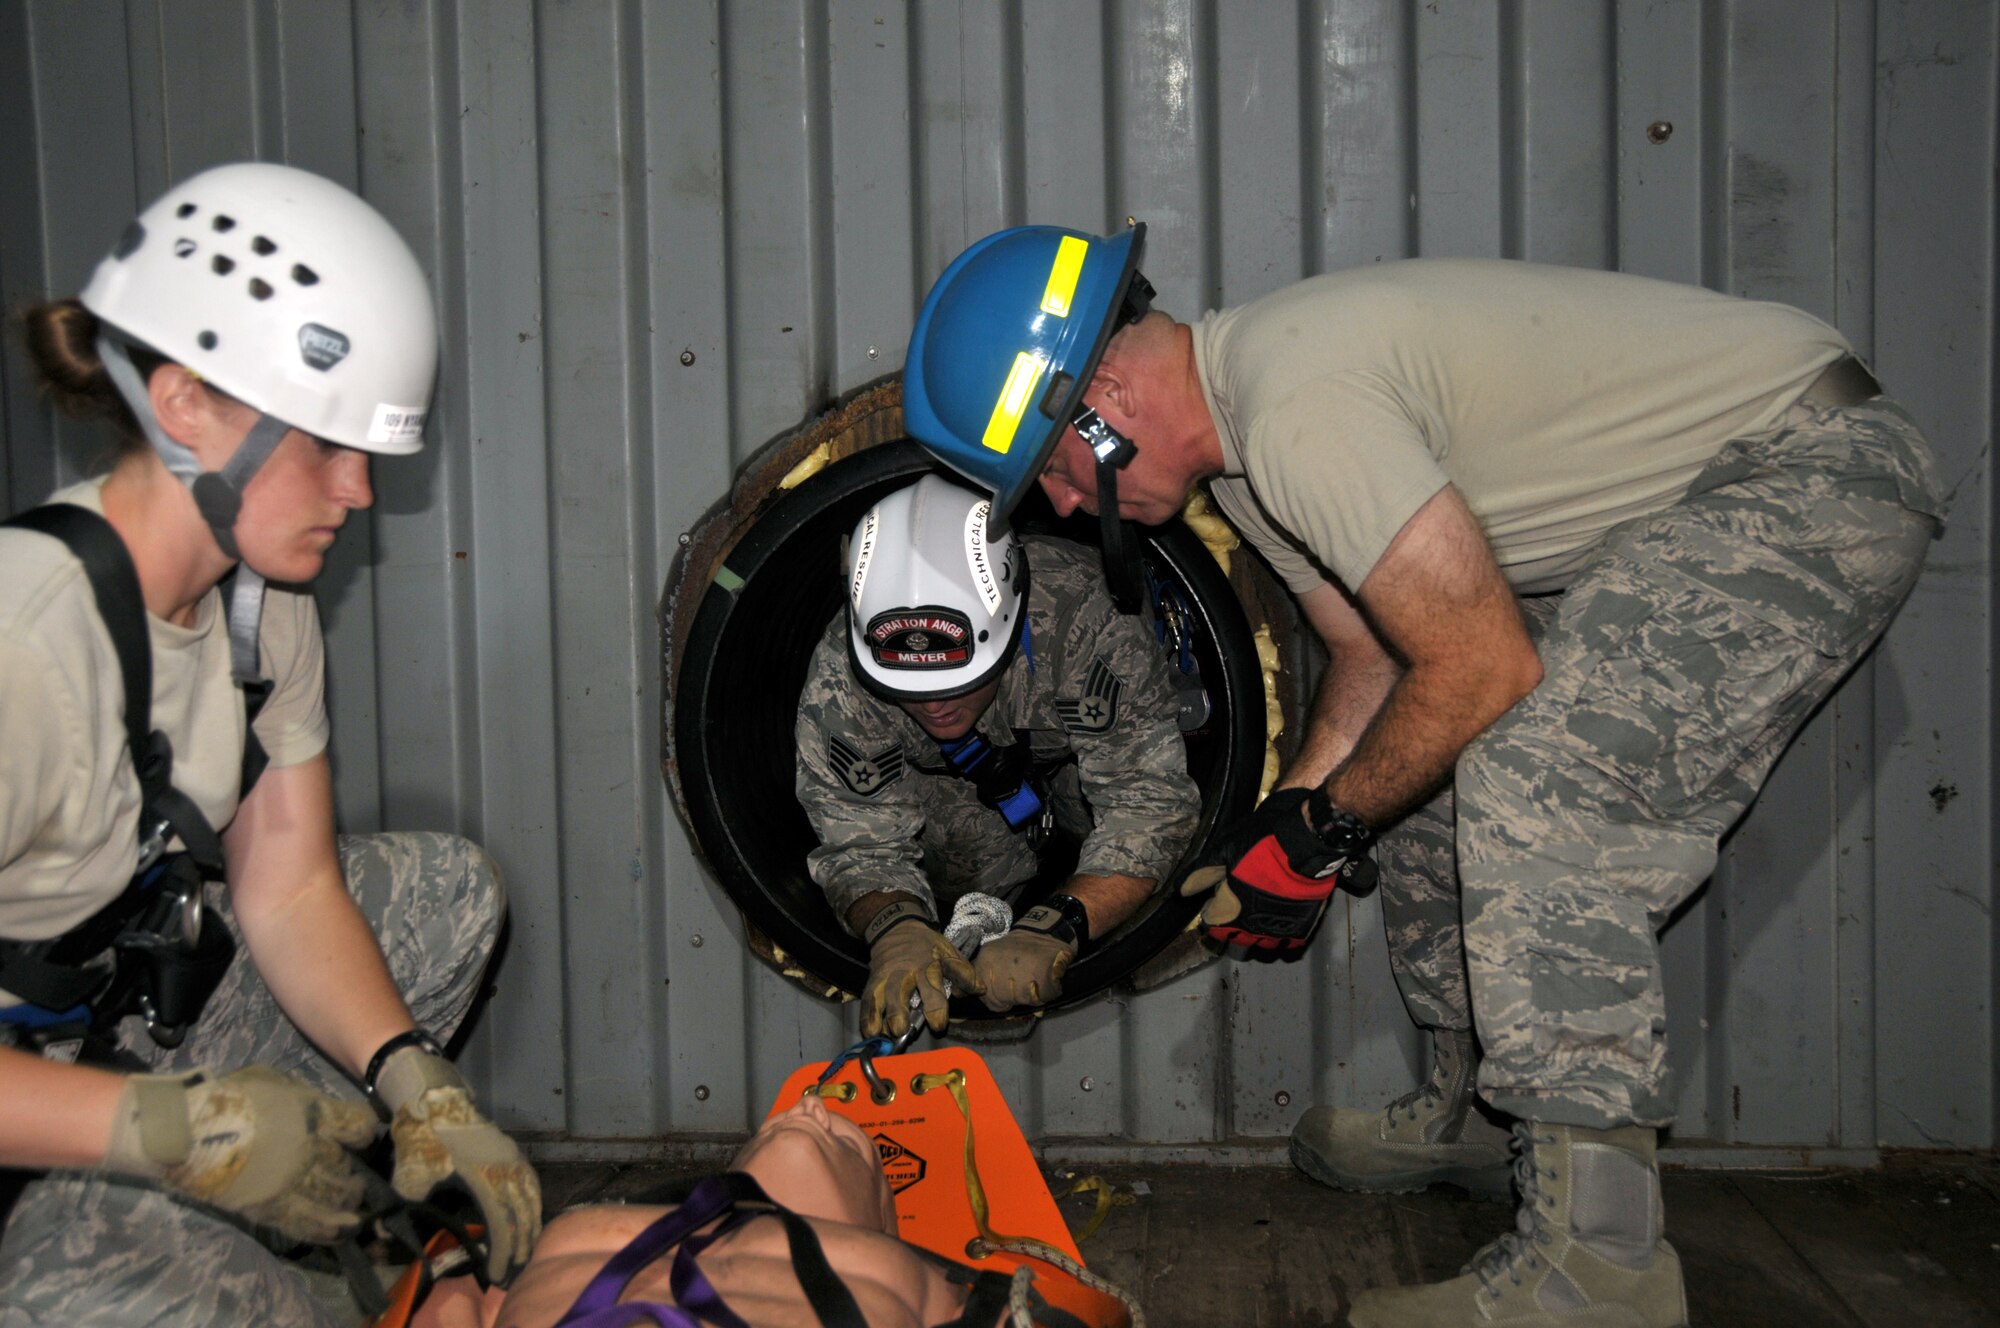 Staff Sgt. Jennifer Bristol and Staff Sgt. Christopher Meyer (center) rescue a victim as Tech. Sgt. Brian Kissinger (right) assists during confined space training for the 109th Fire Department's search and rescue team at Stratton Air National Guard Base, New York, on Sept. 17, 2015. The 12-person search and rescue team trains monthly on various rescue techniques. (U.S. Air National Guard photo by Tech. Sgt. Catharine Schmidt/Released)